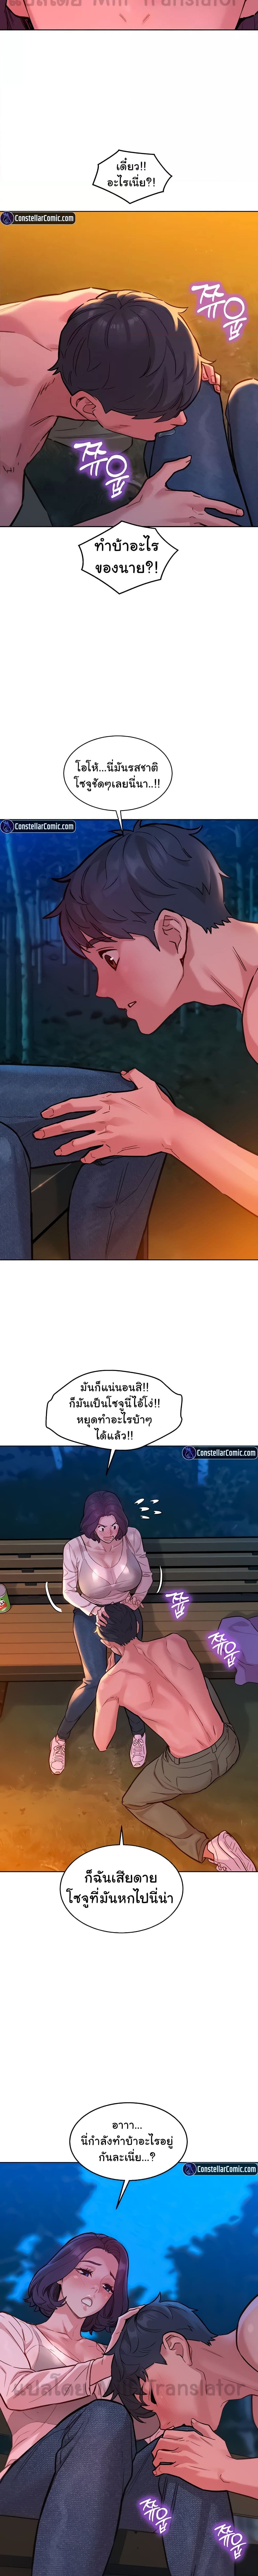 Let’s Hang Out from Today ตอนที่ 39 ภาพ 4